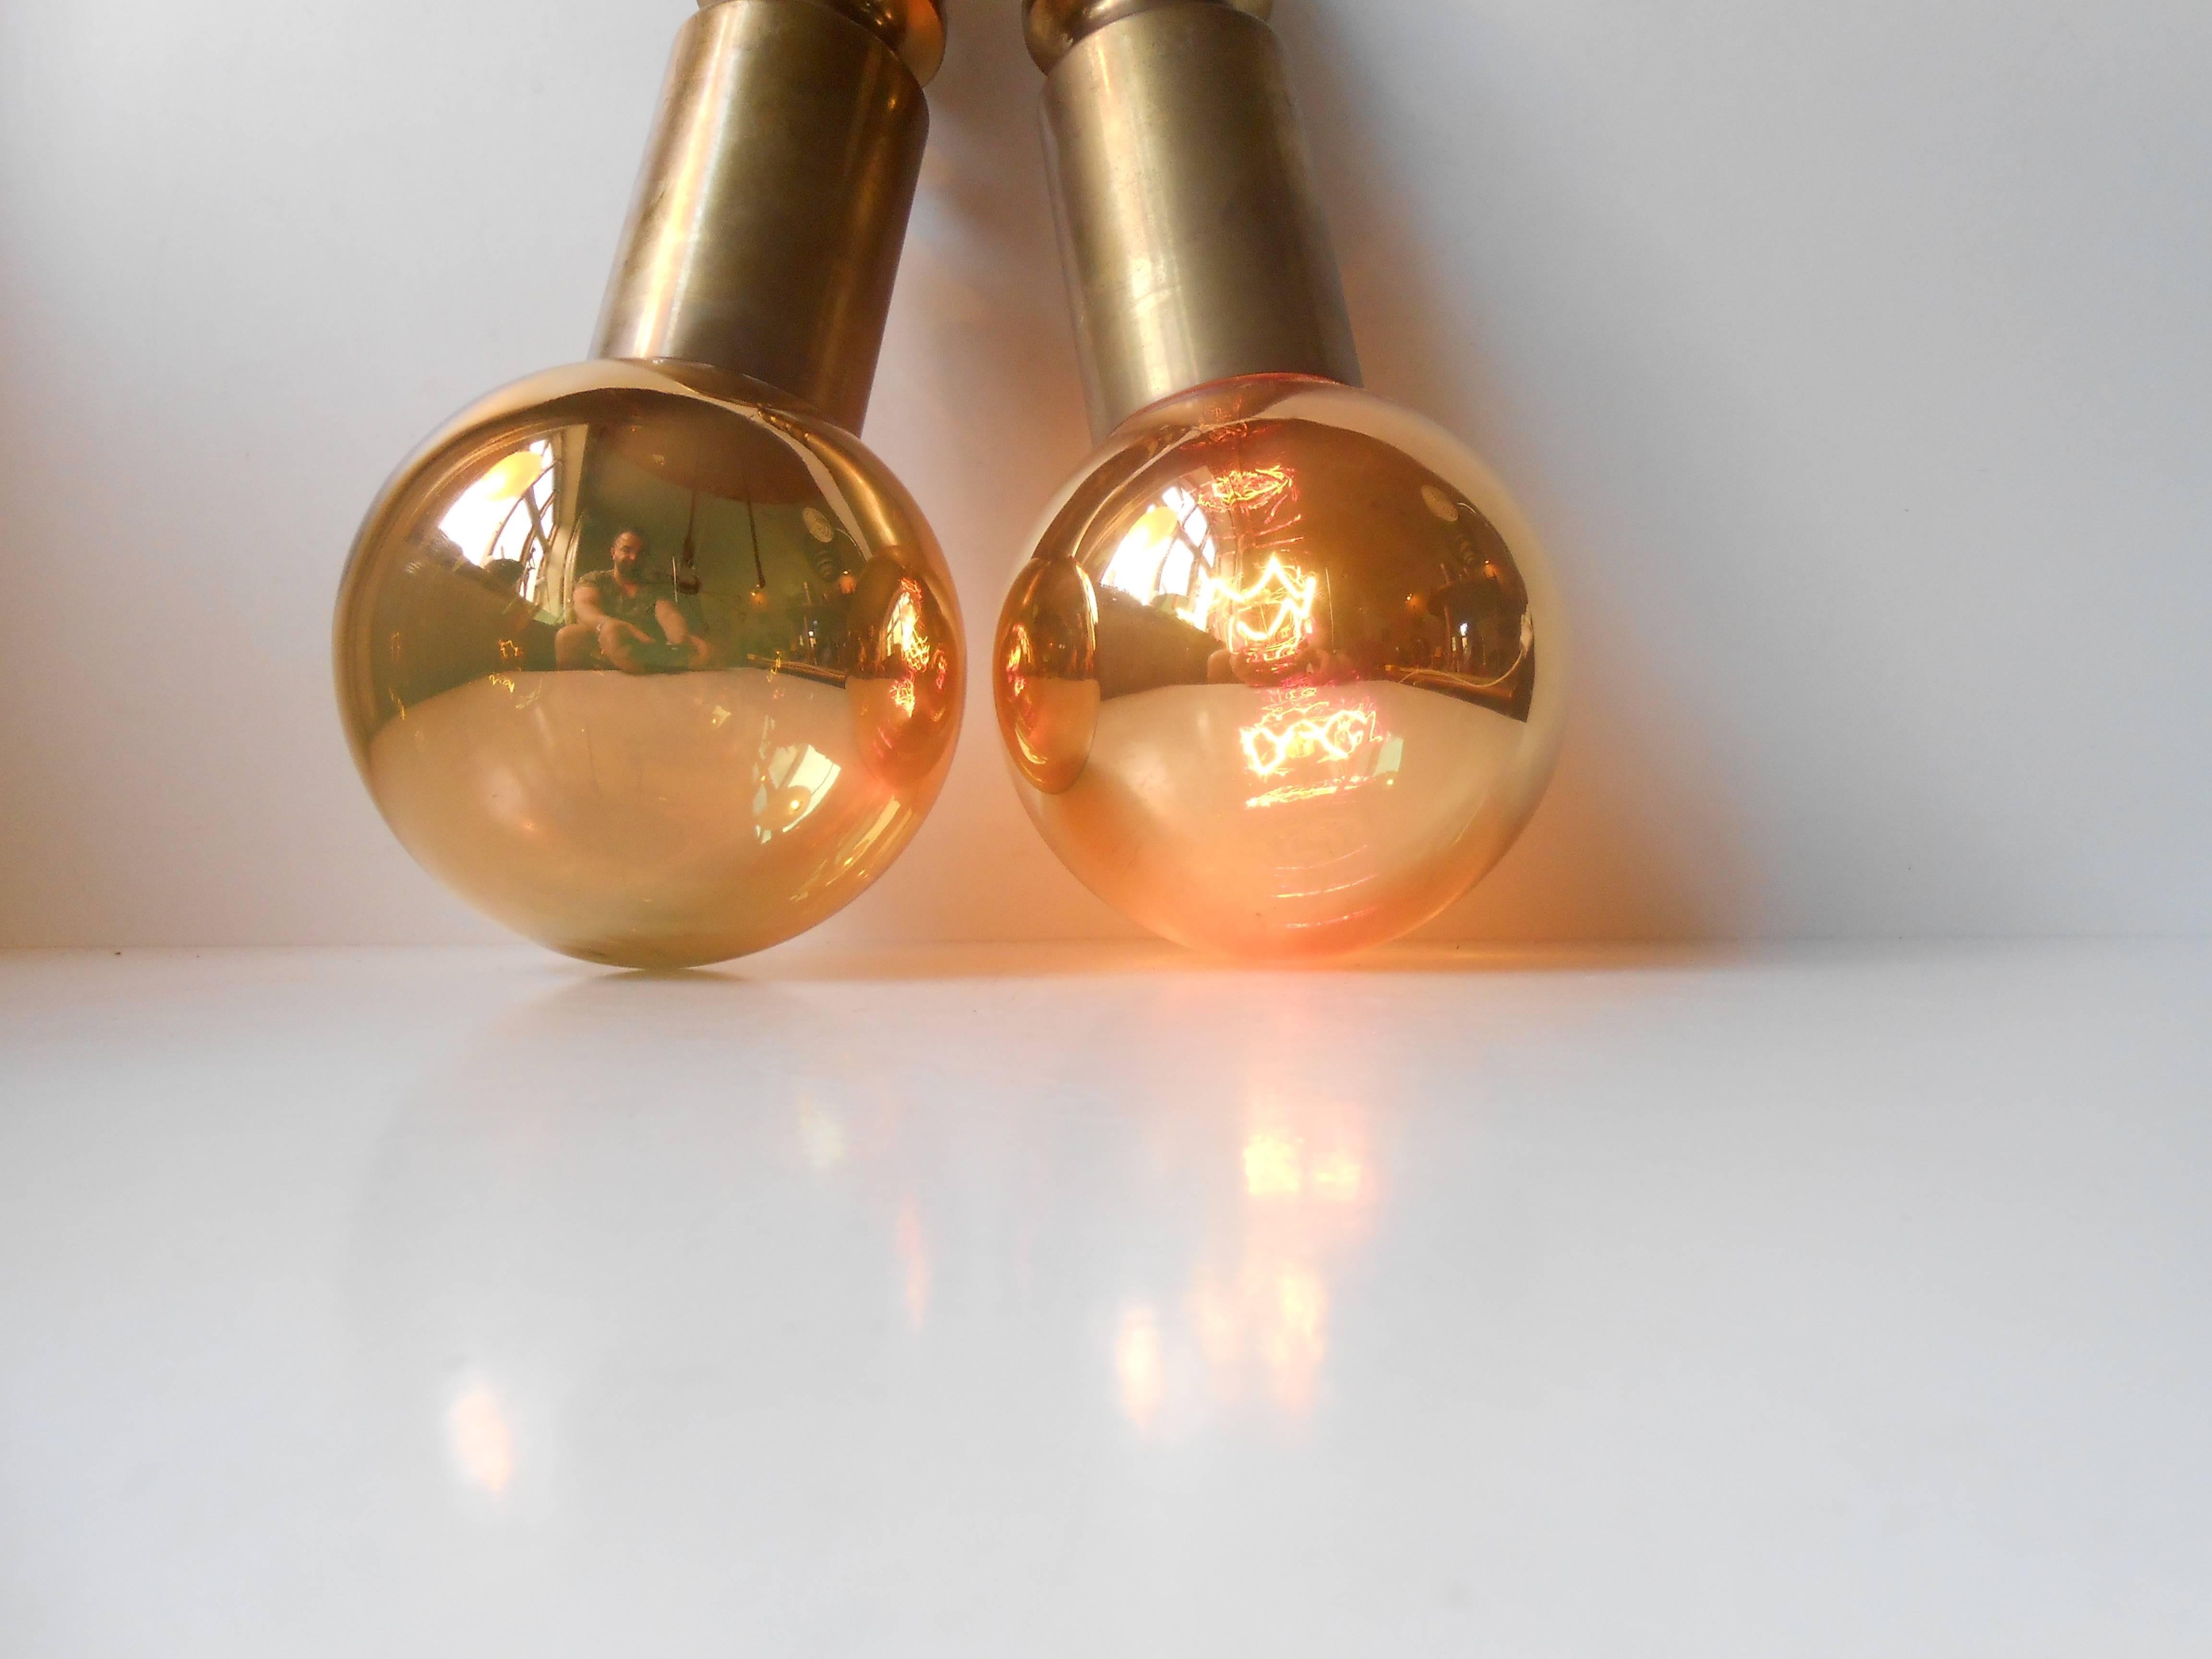 Rare pair of Frimann Goldstar pendant lamps manufactured by Philips in the 1970s. Both mounted with original bulbs from the period - claimed to be everlasting. An additional feature is that the bulbs reflect its surroundings when un-lid.